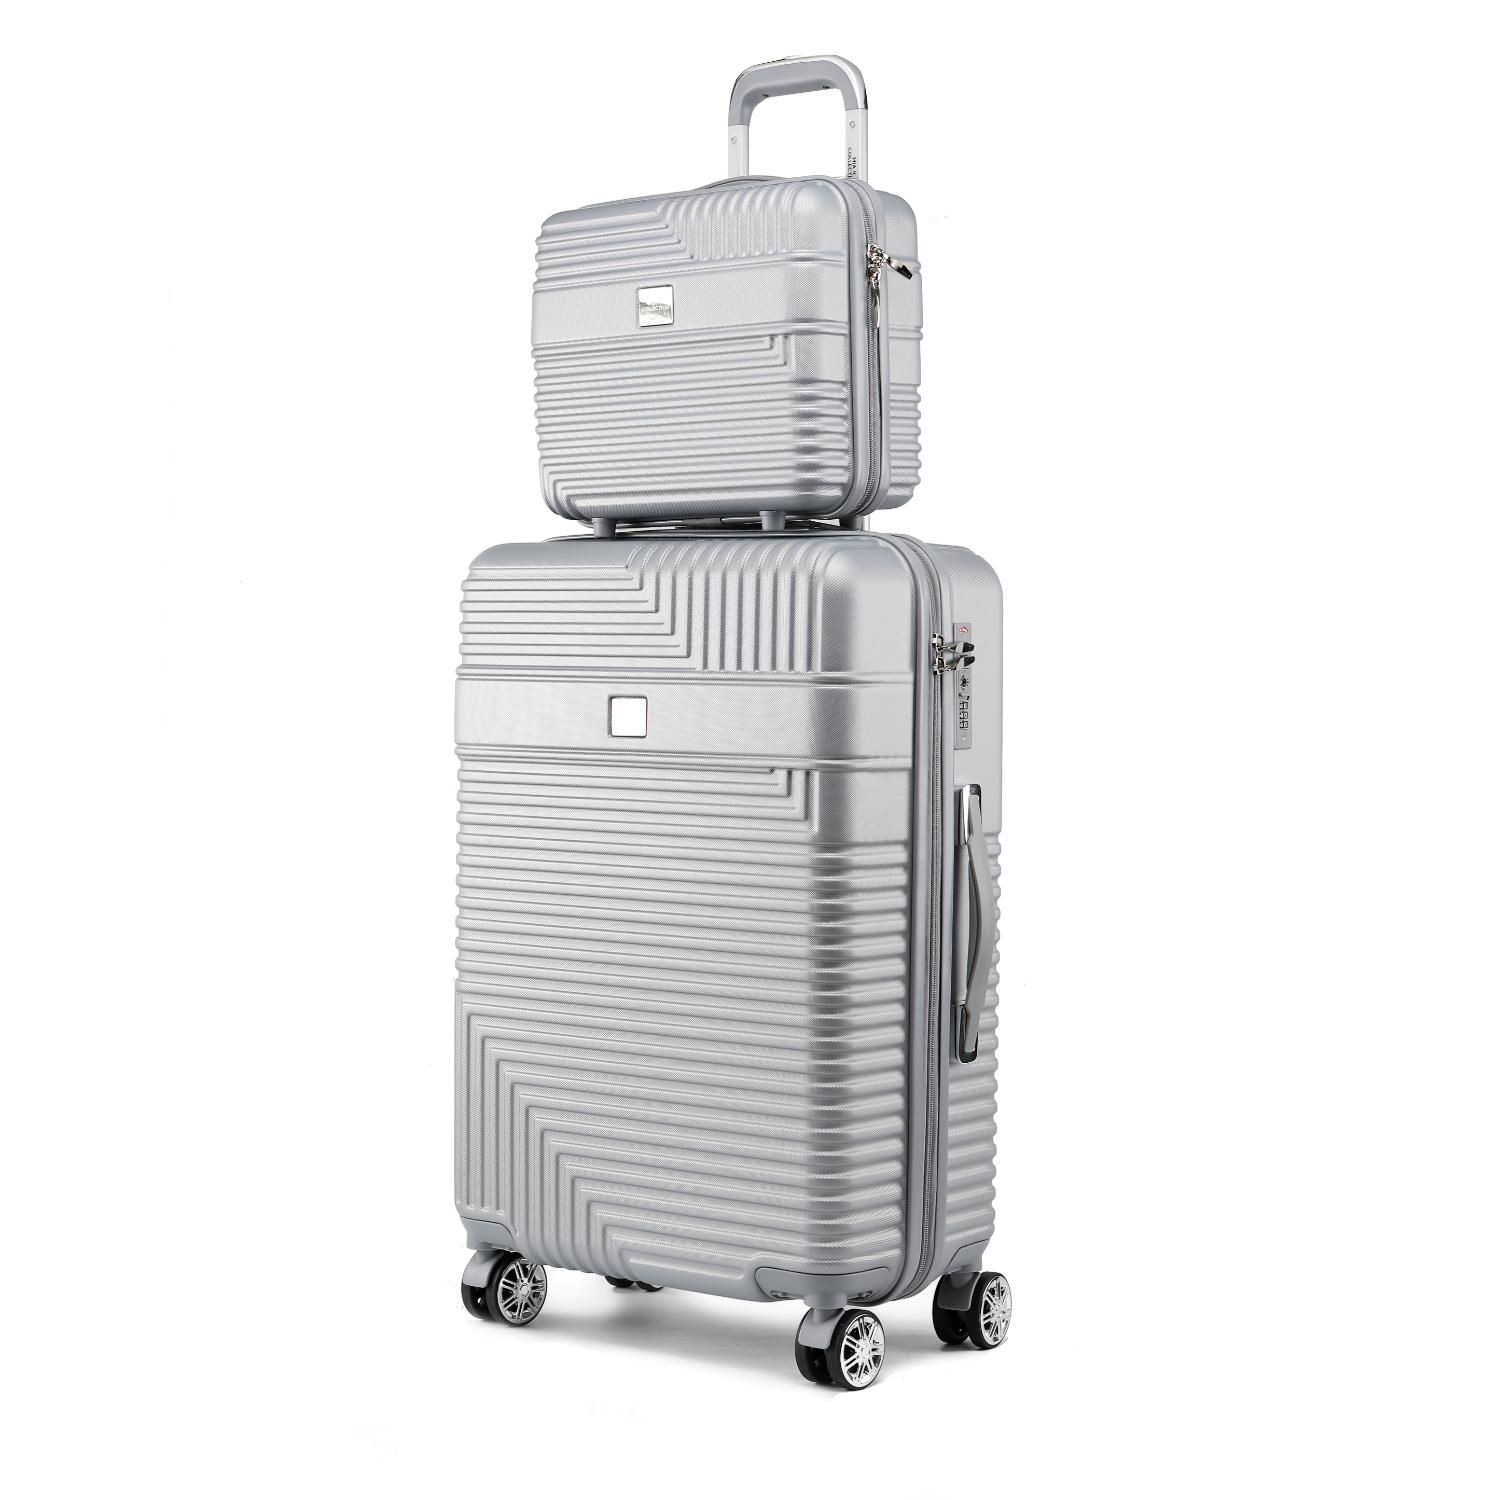 MKF Collection Mykonos Luggage Set With A Medium Carry-on And Small Cosmetic Case 2 Pieces By Mia K - Silver